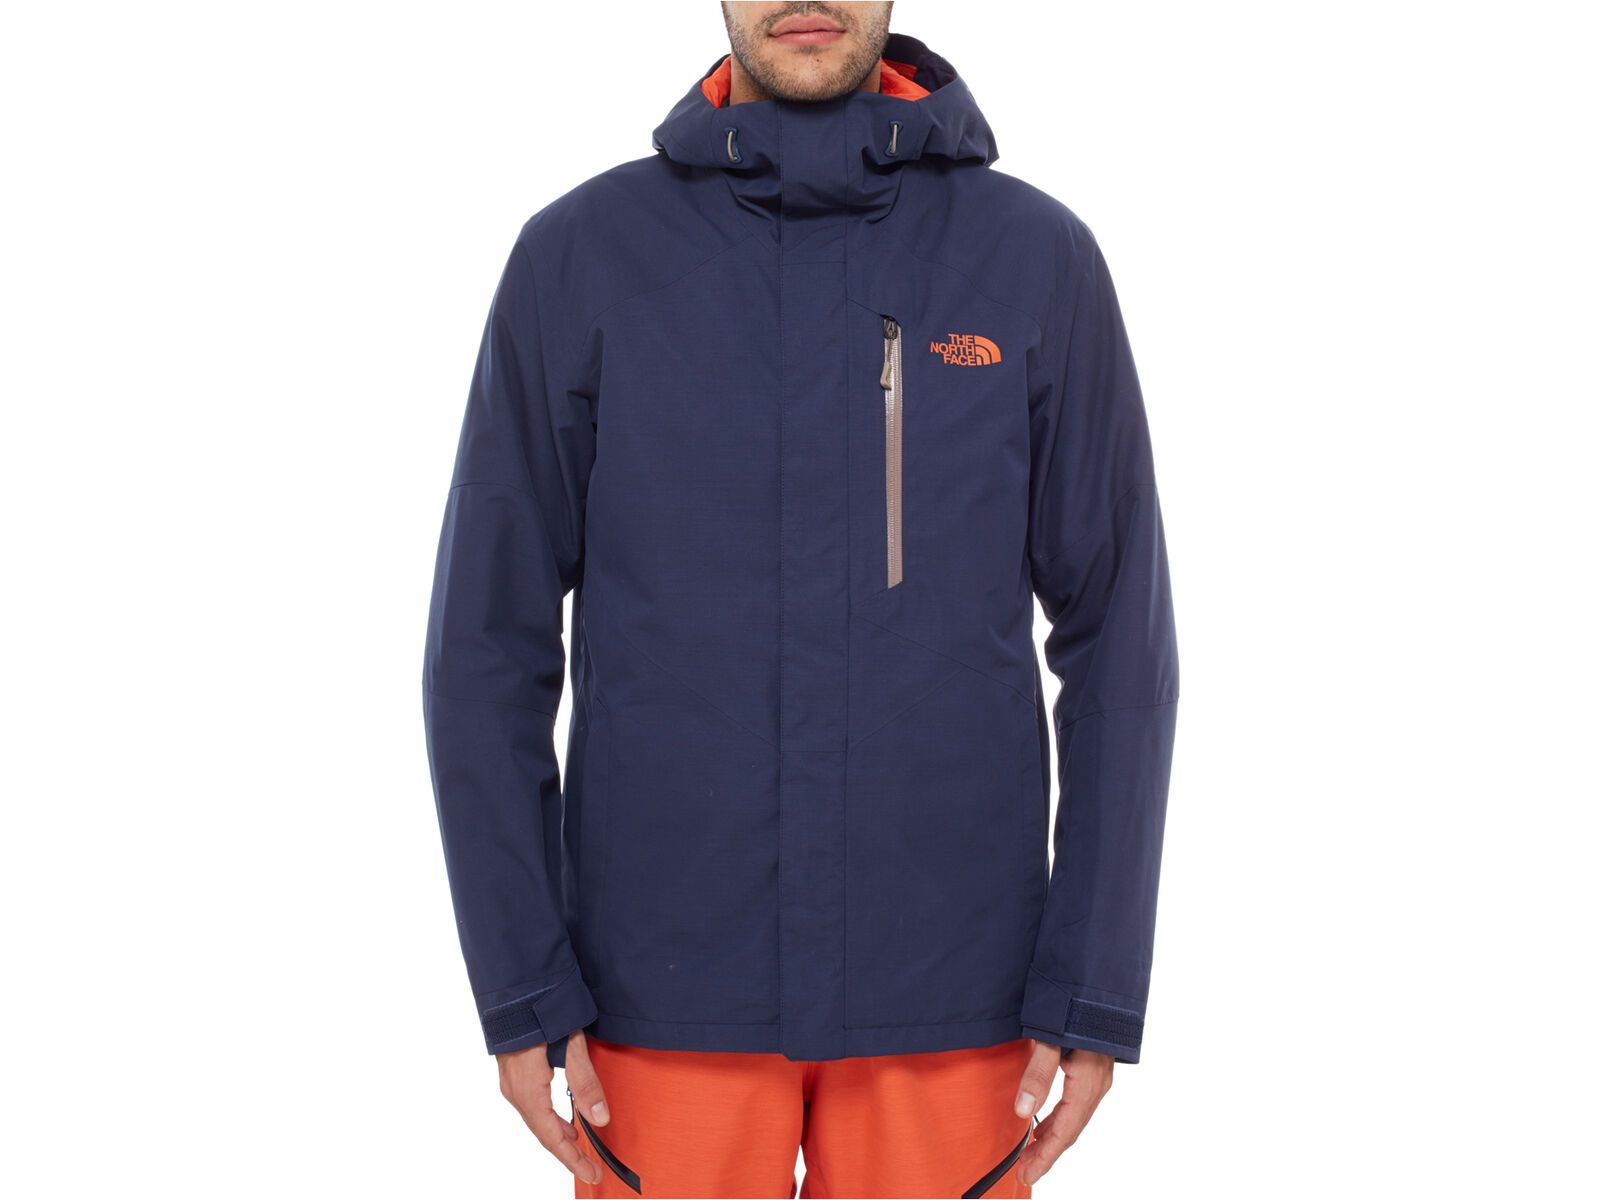 【THE NORTH FACE】NFZ INSULATED JACKET